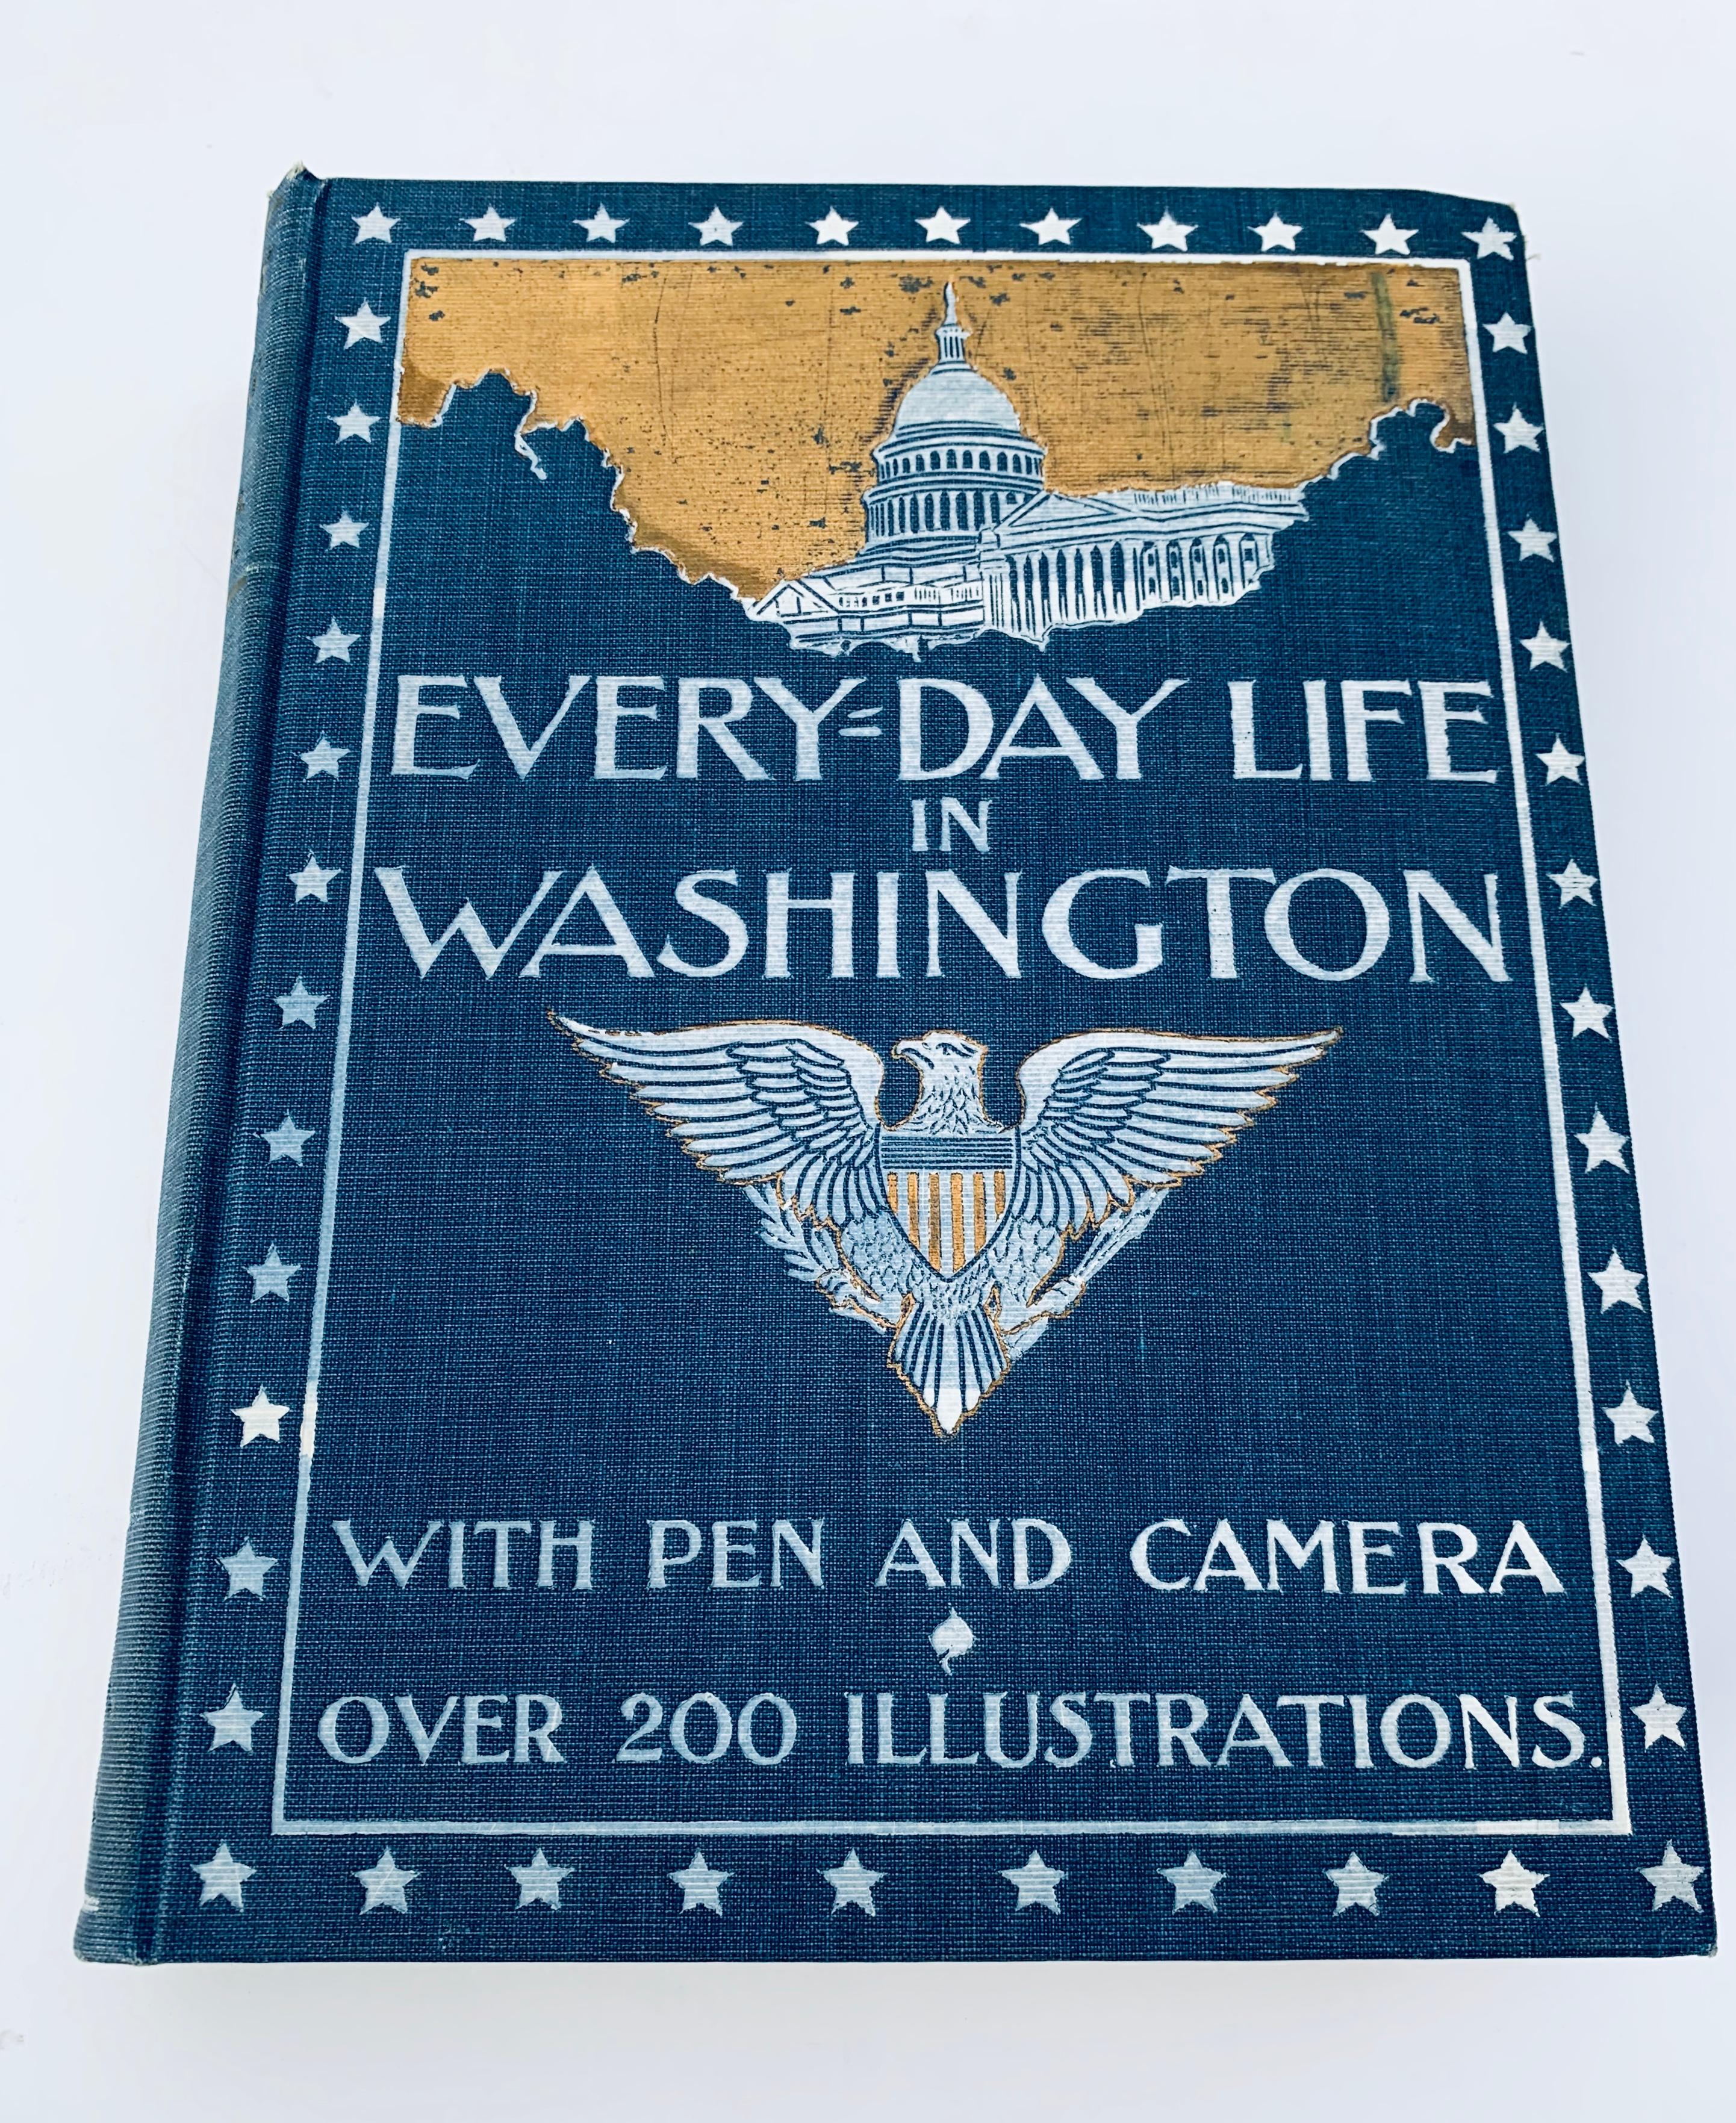 Every-Day Life in WASHINGTON by Charles M. Pepper (1900)